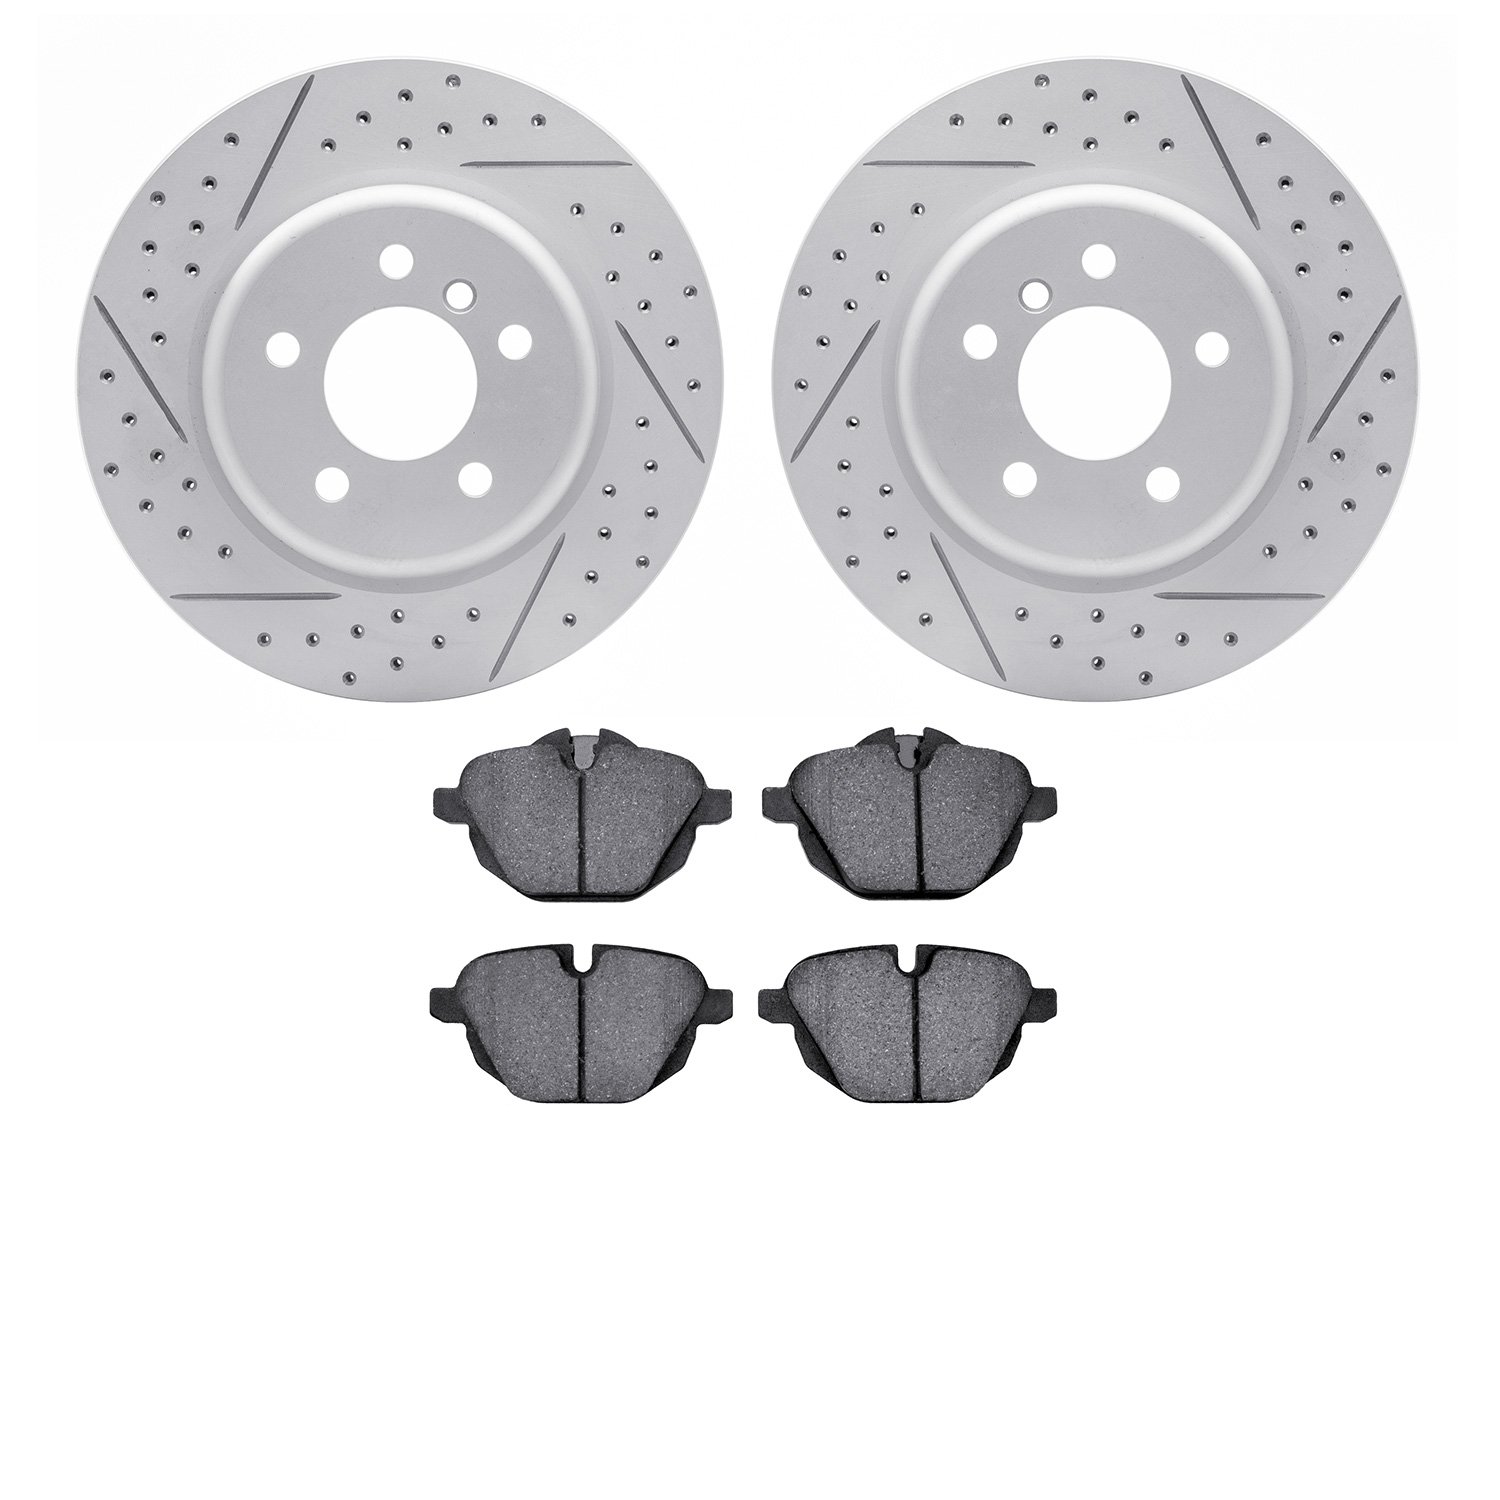 2502-31079 Geoperformance Drilled/Slotted Rotors w/5000 Advanced Brake Pads Kit, 2011-2016 BMW, Position: Rear